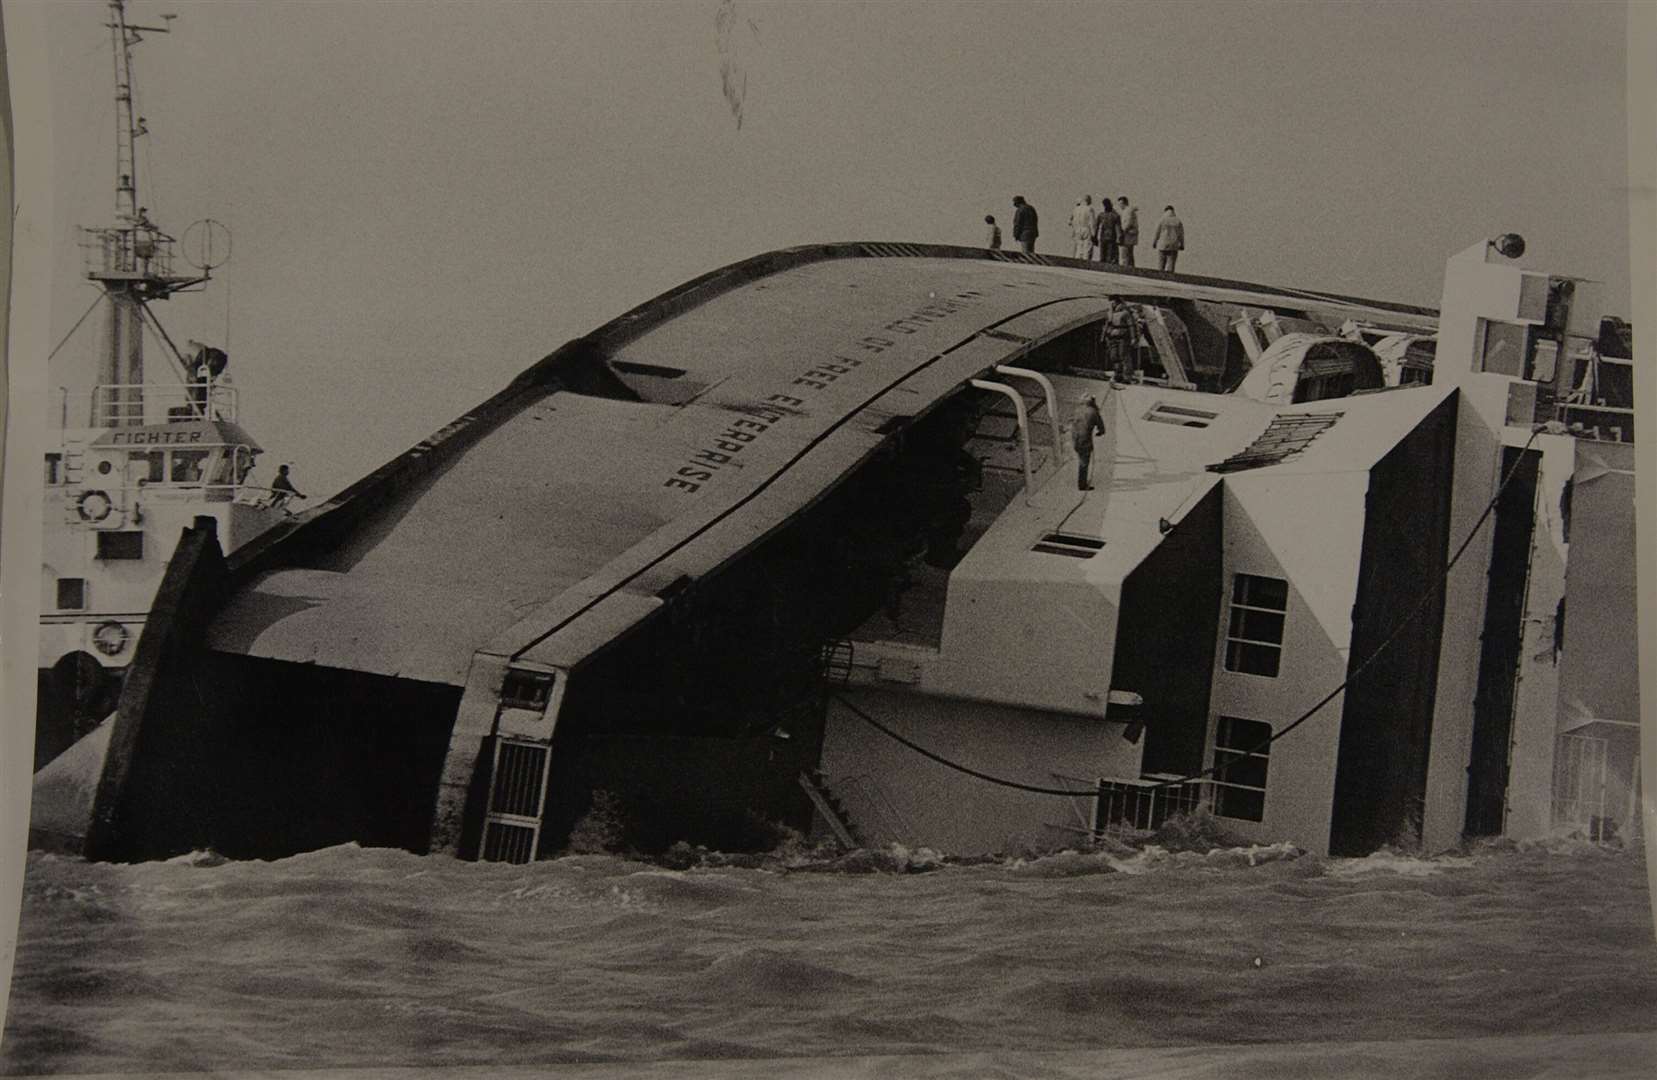 The capsized ferry in the Zeebrugge disaster, 1987